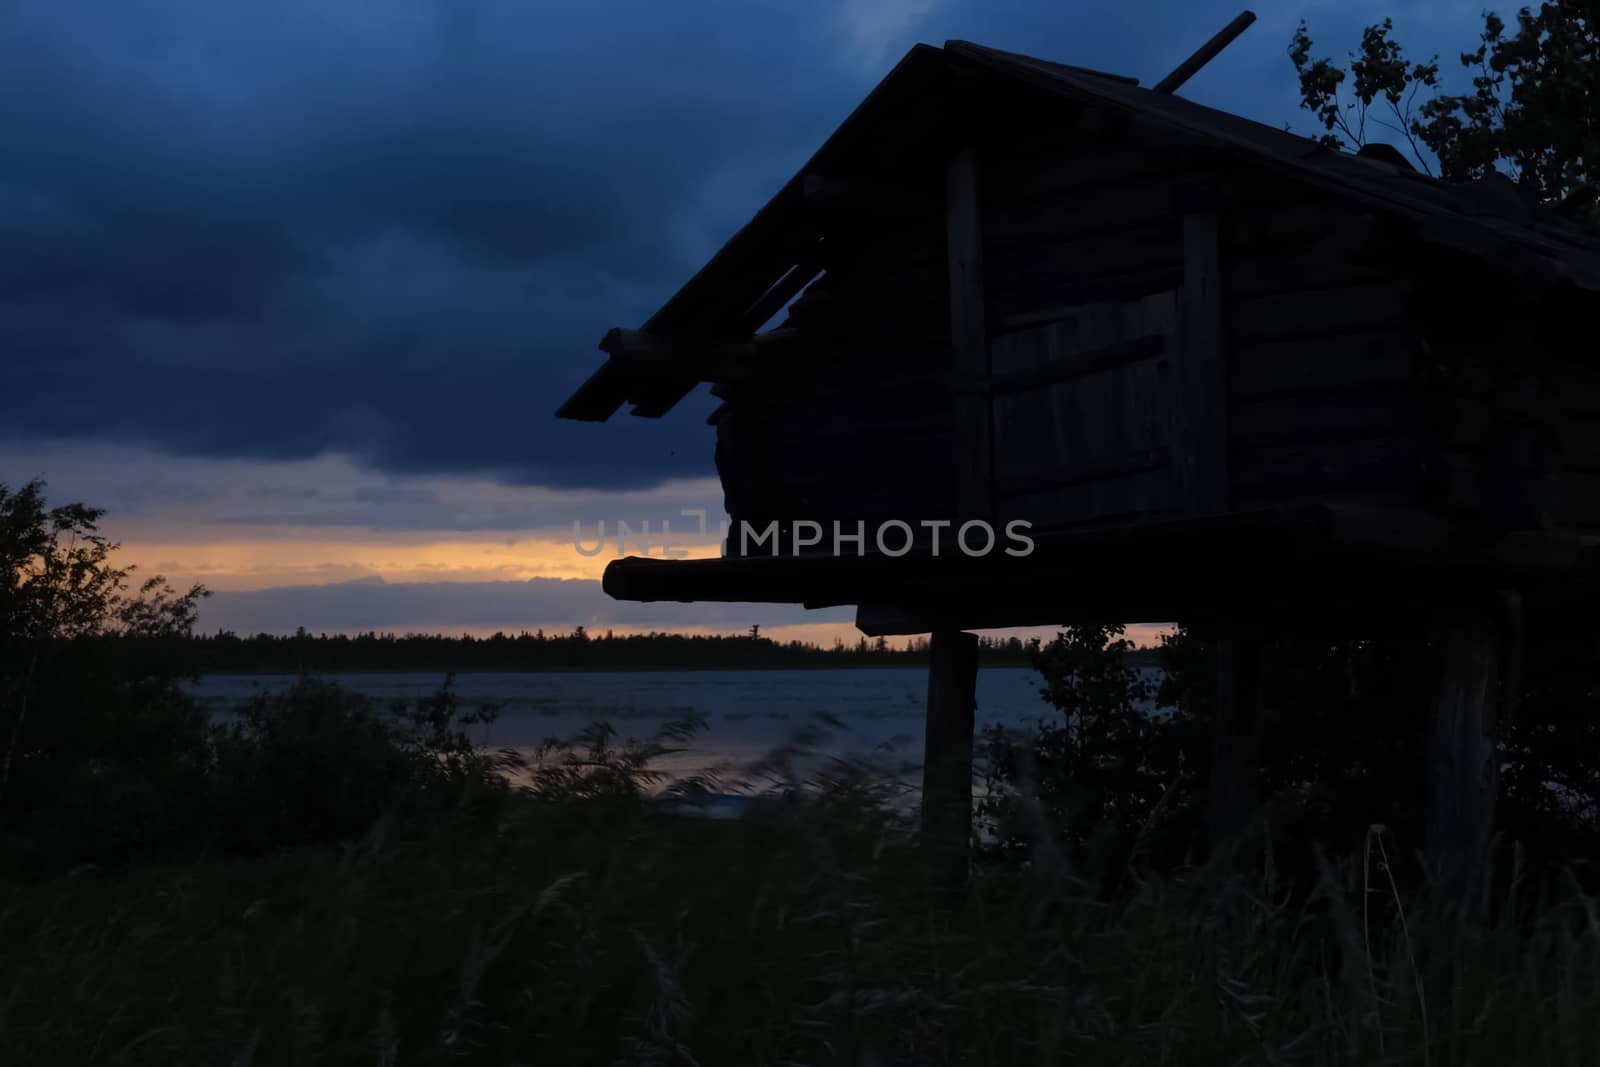 A house on stilts on the shore of the lake. Evening, twilight.